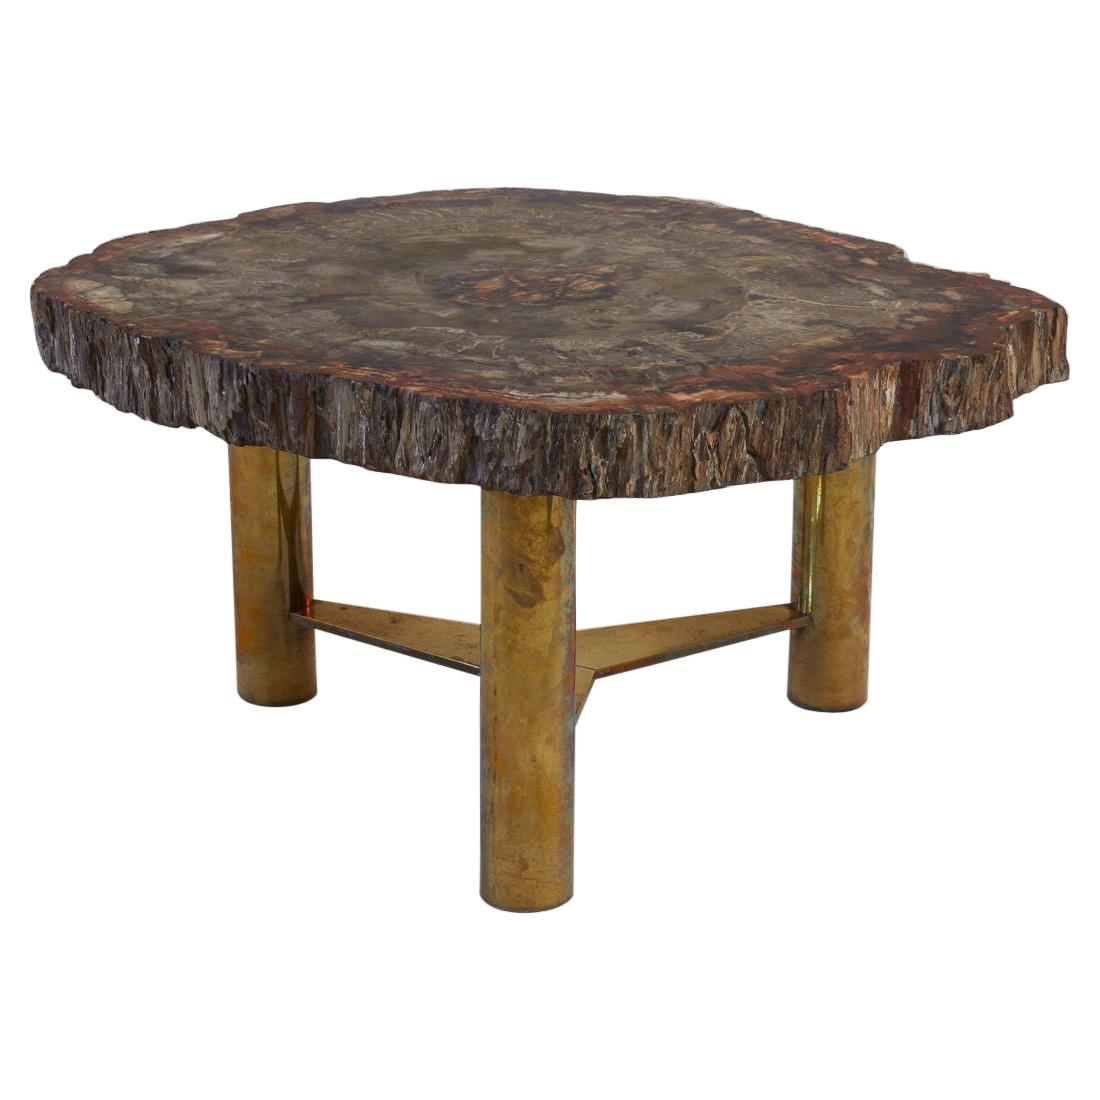 1960s French Petrified Wood Plateaux with Bronze Base Cocktail Table